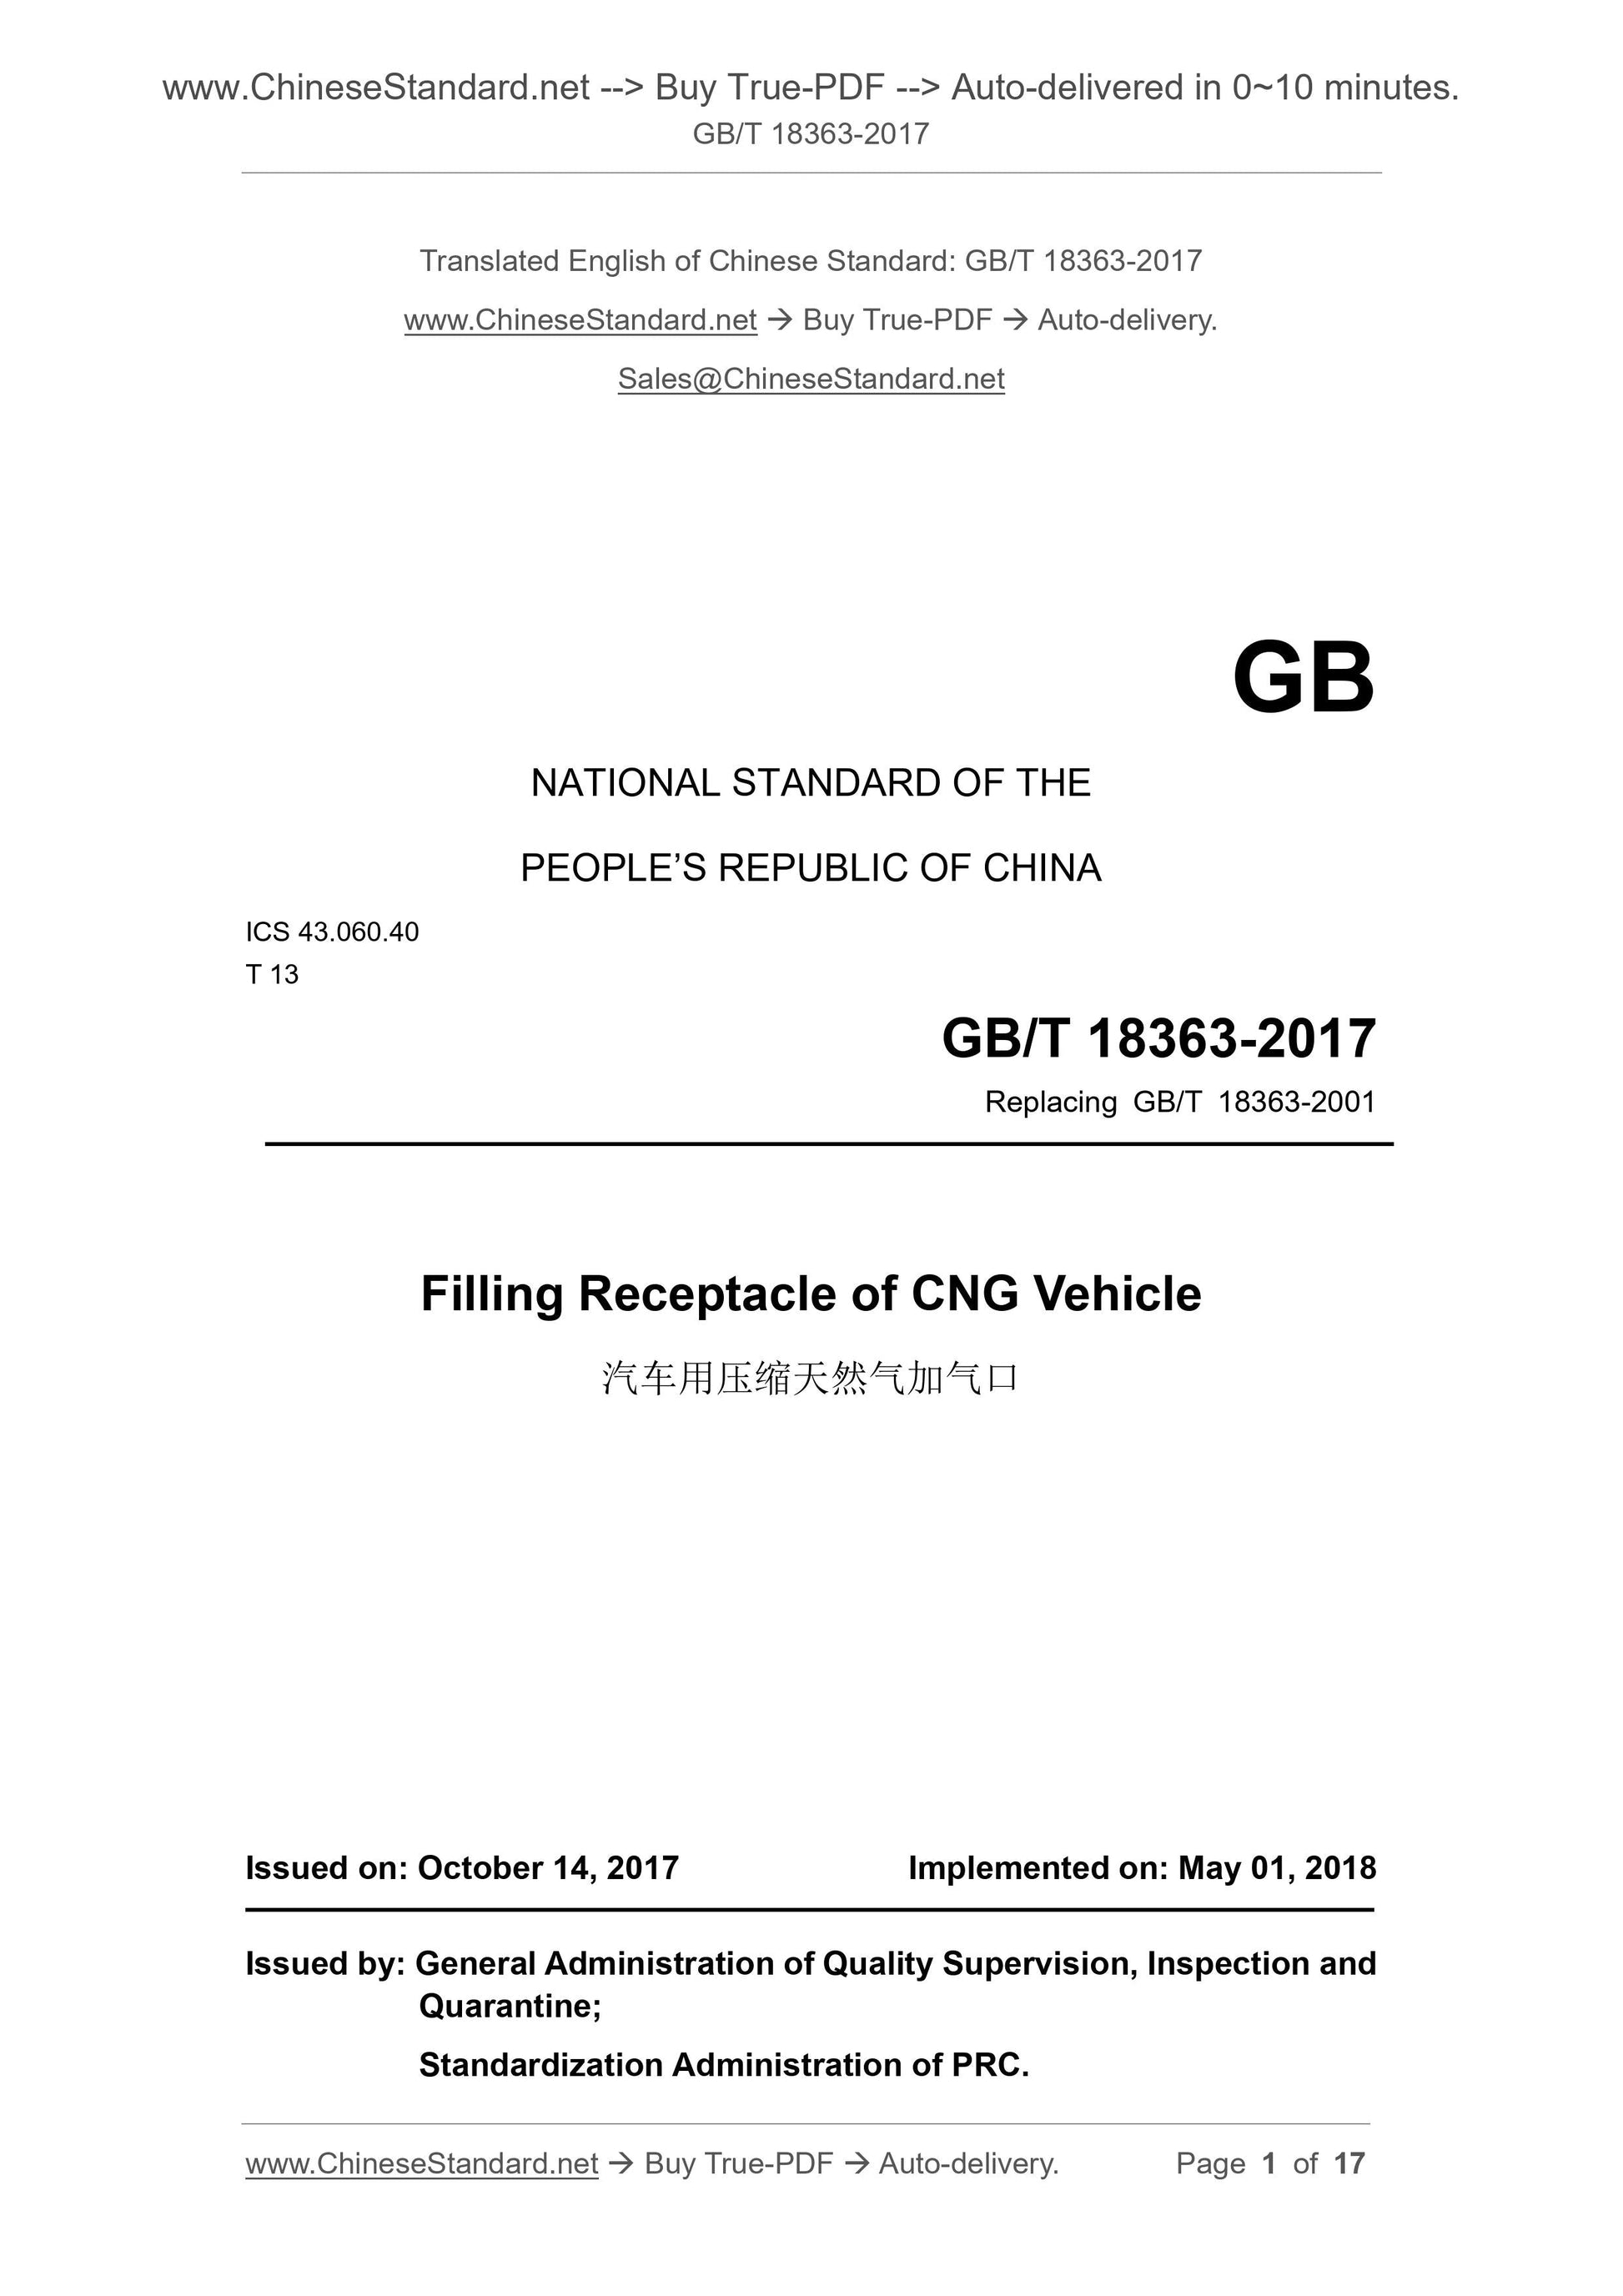 GB/T 18363-2017 Page 1